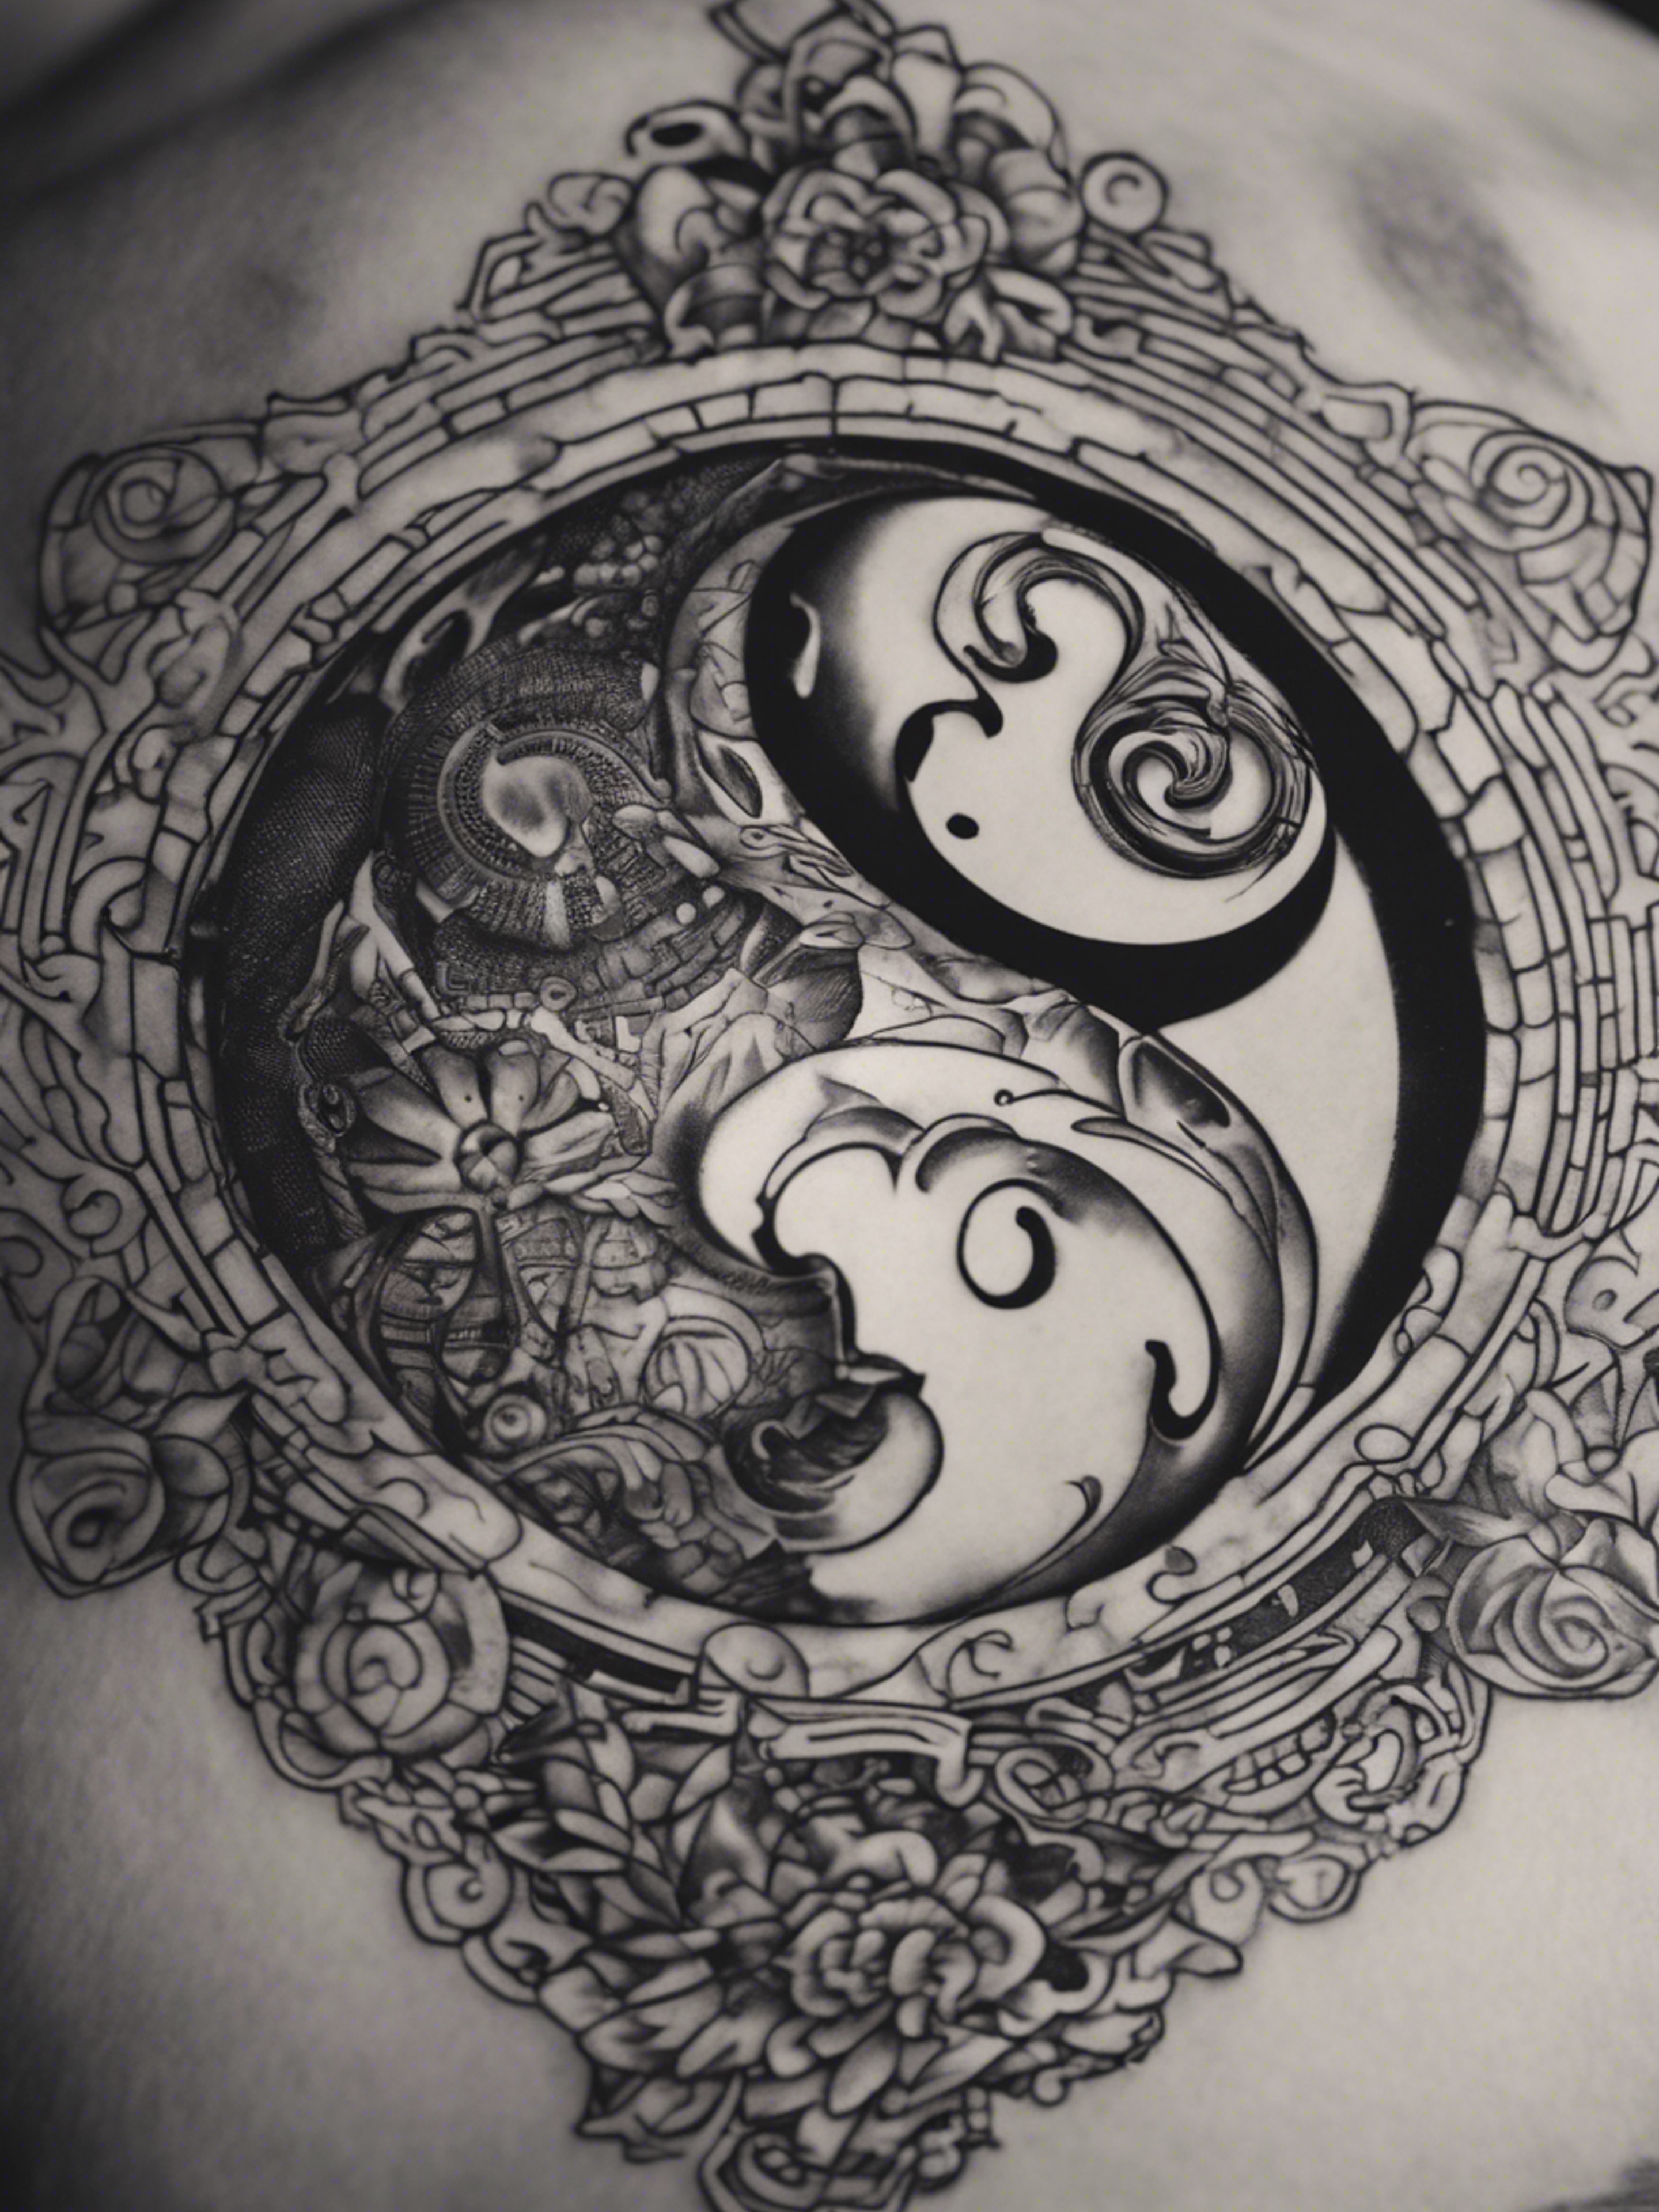 A black and gray tattoo demonstrating the sharp contrast of yin and yang. Kertas dinding[cf6688009cd14e619f30]